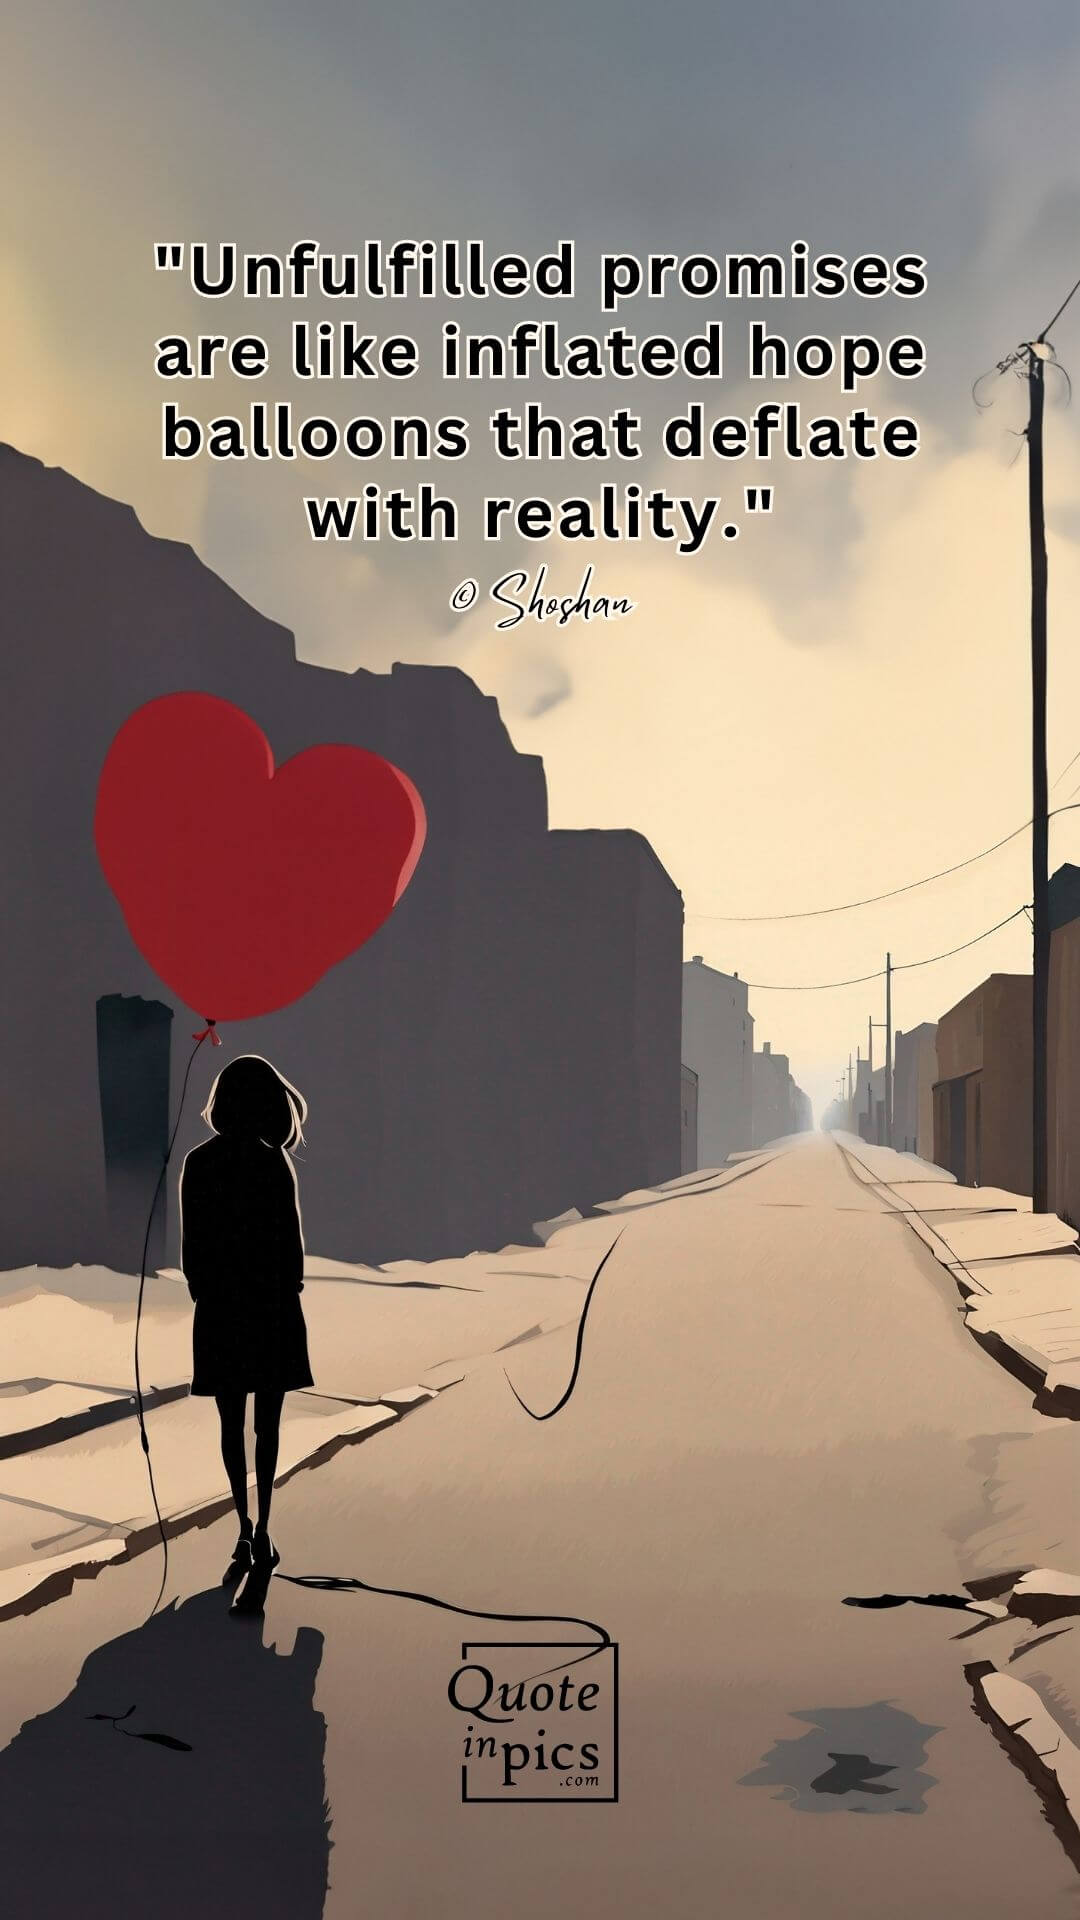 "Unfulfilled promises are like inflated hope balloons that deflate with reality." © Shoshan